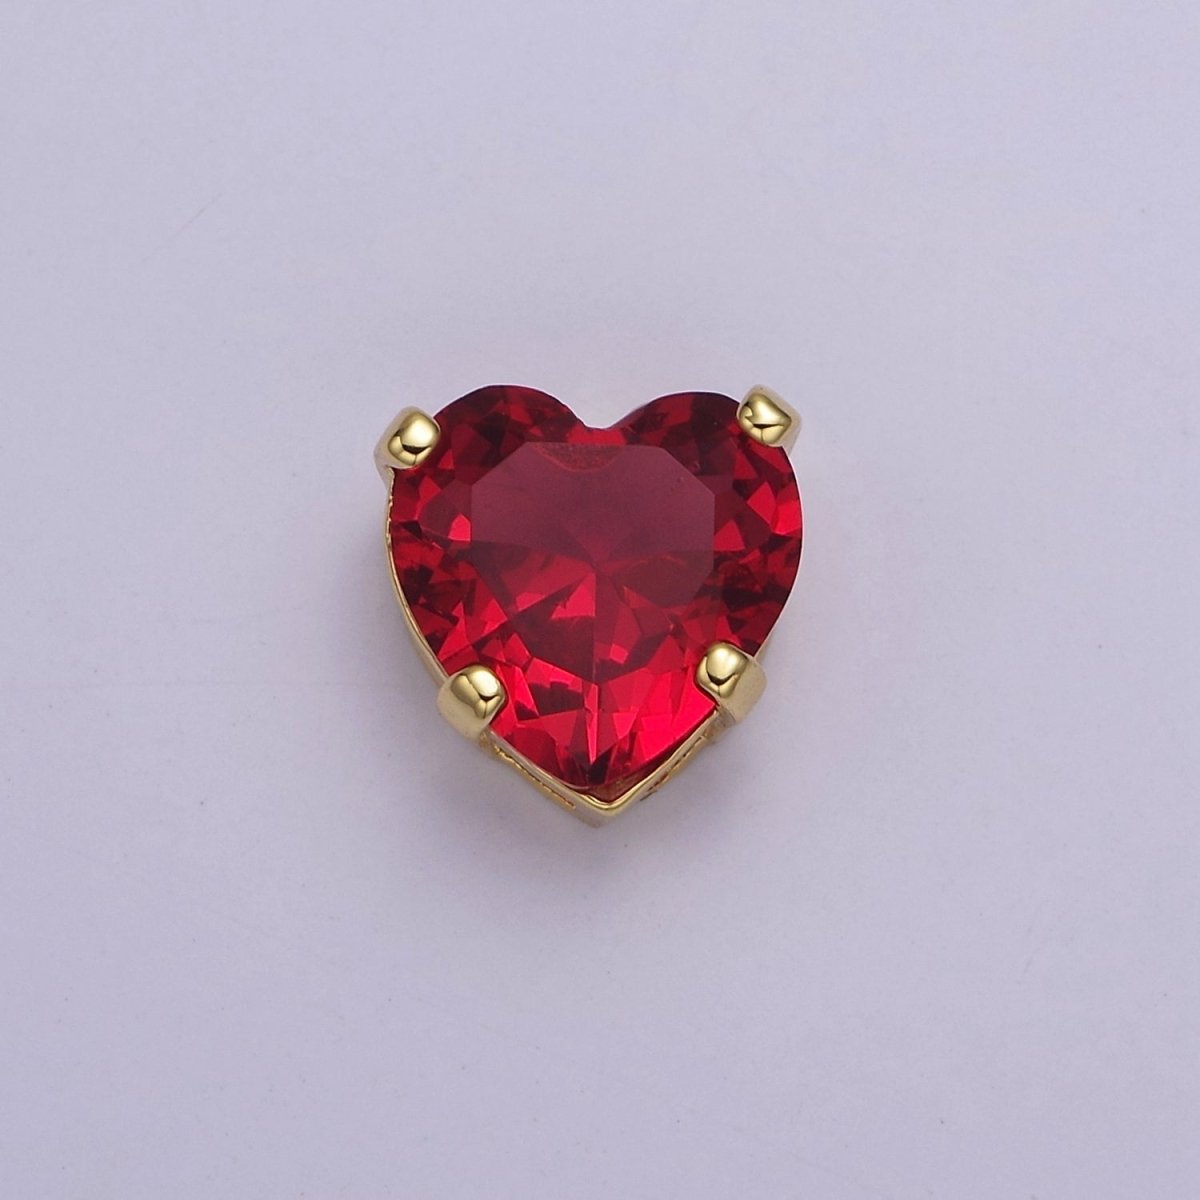 Dainty CZ Heart Spacer Bead, Gold Filled Heart Spacer Beads Pink Greem CZ Spacer Beads, Small Heart Spacers for Bracelet Necklace B-185 B-205 - DLUXCA